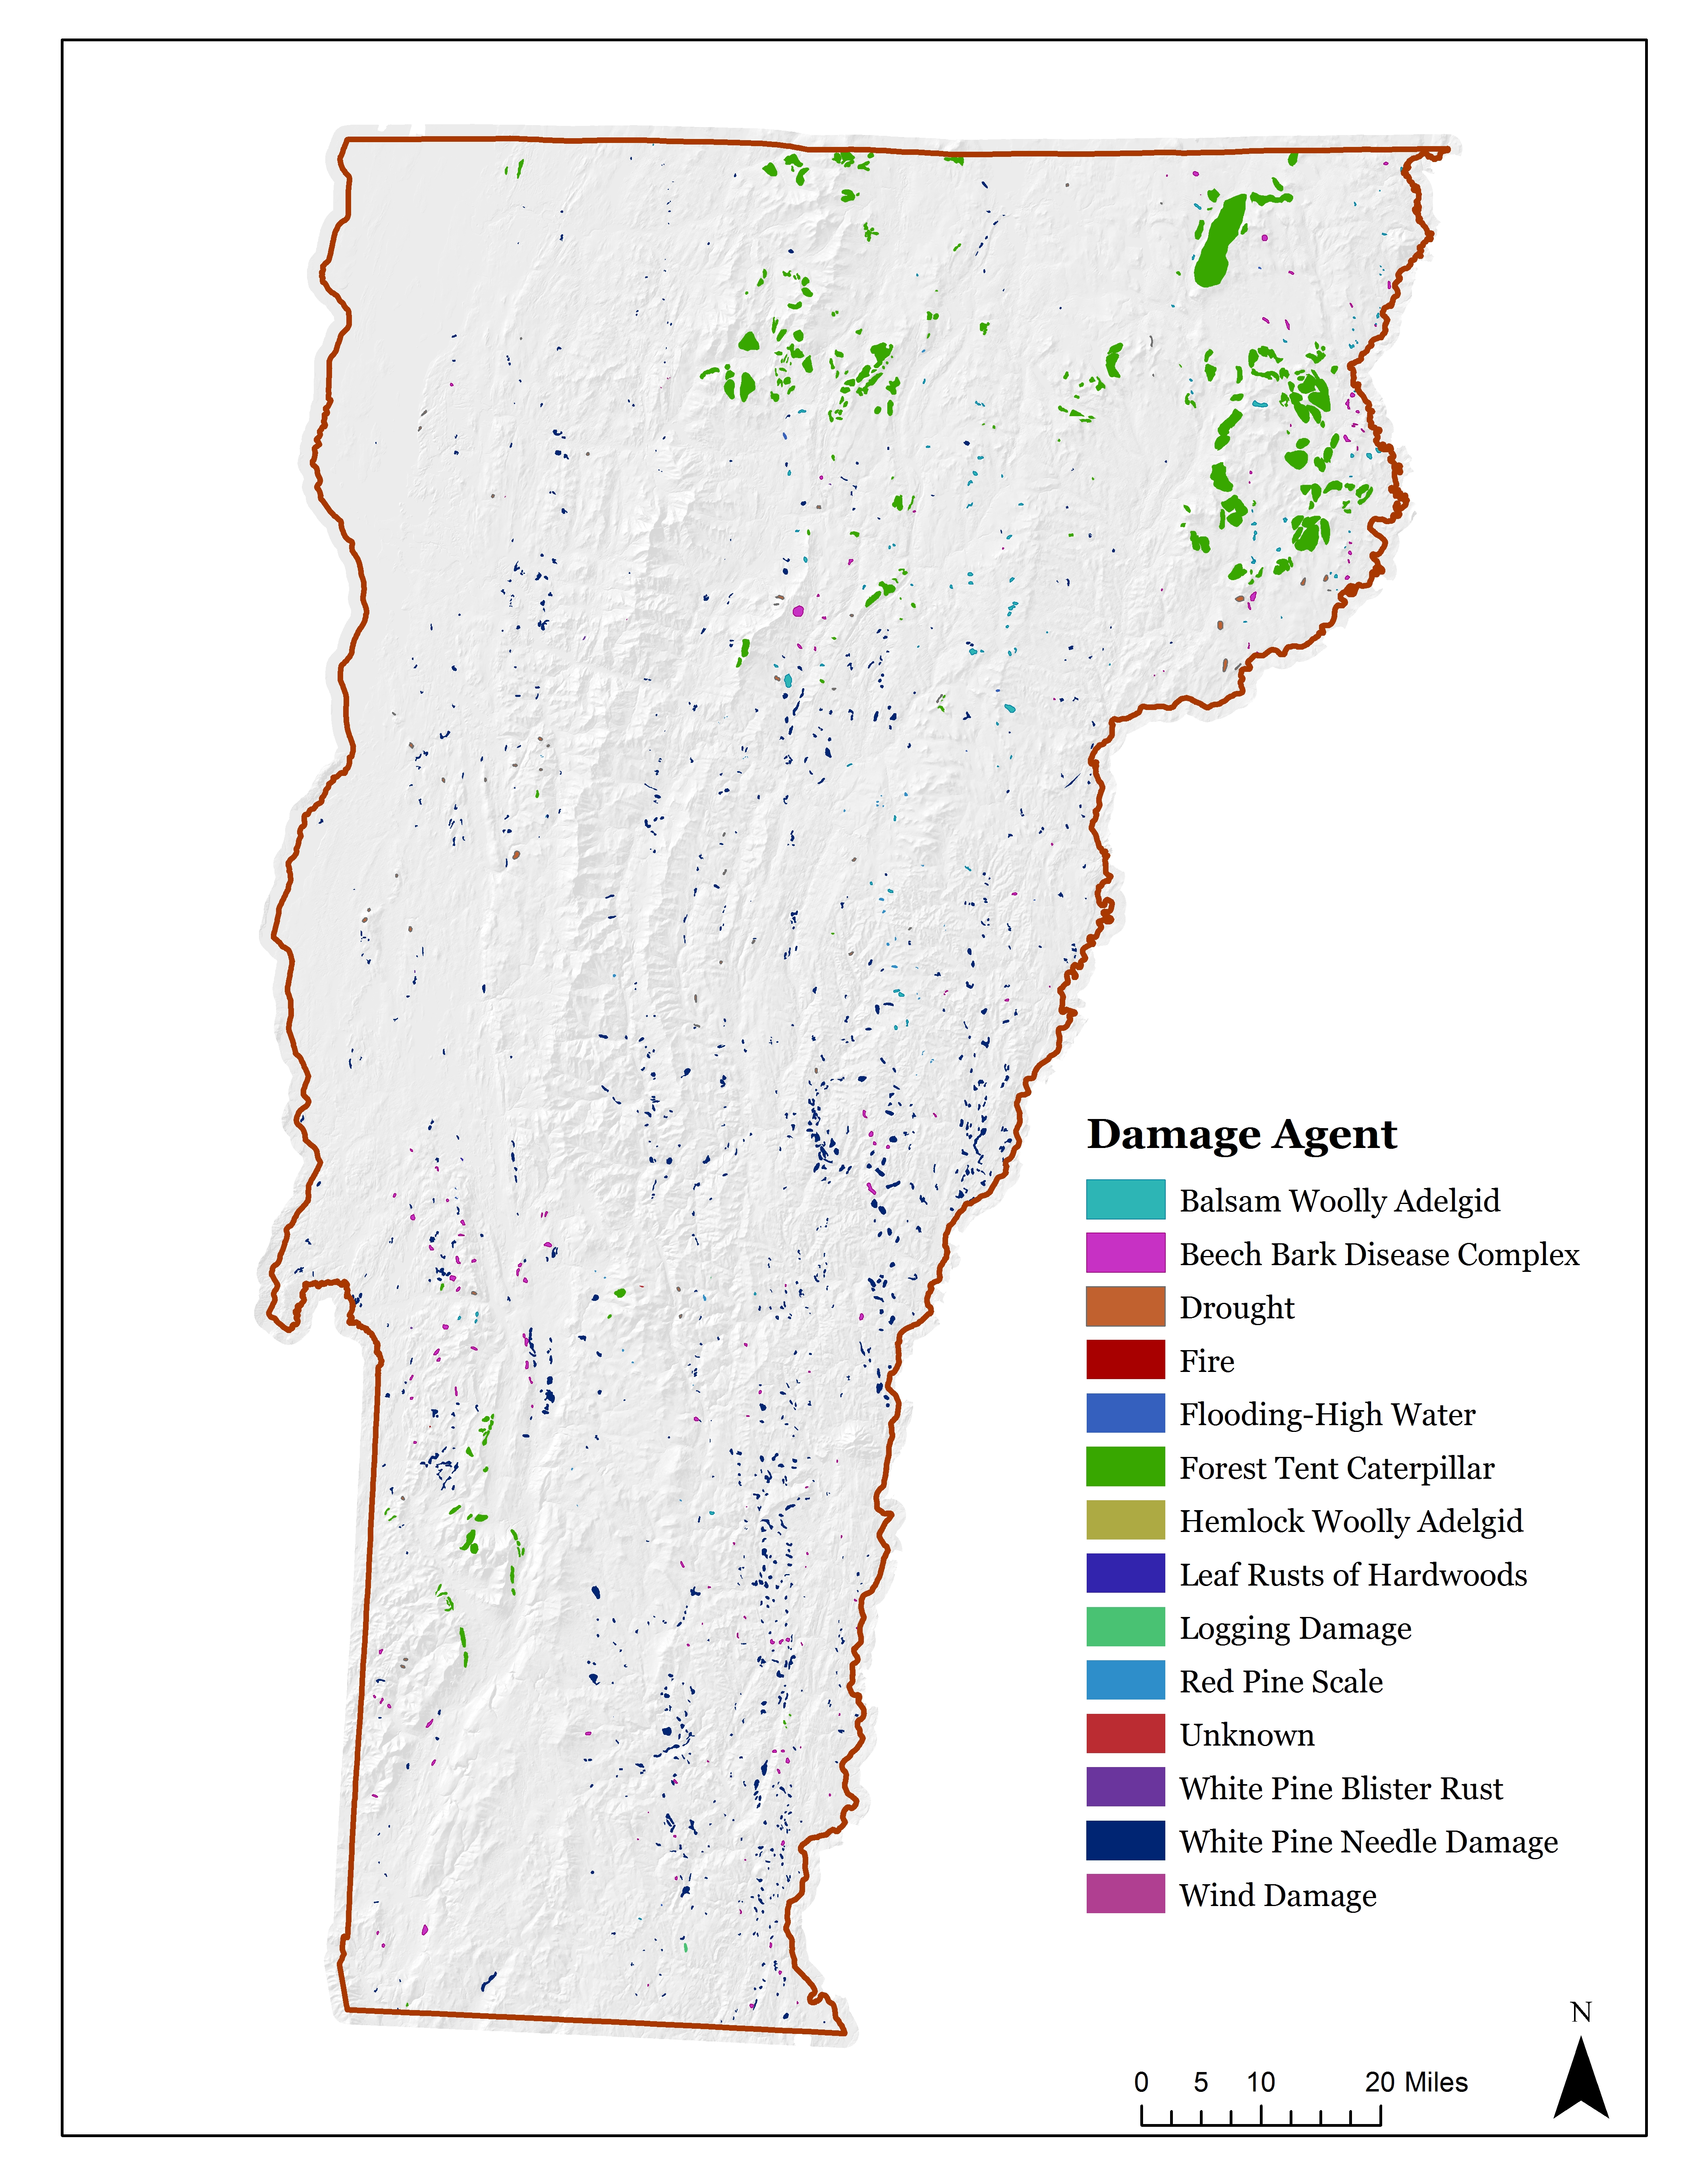 Figure 6. Locations of 2018 mapped forest disturbance from Vermont aerial detection surveys. Disturbance polygons were increased in size for visibility. Only those damage agents with the highest occurrence are shown.